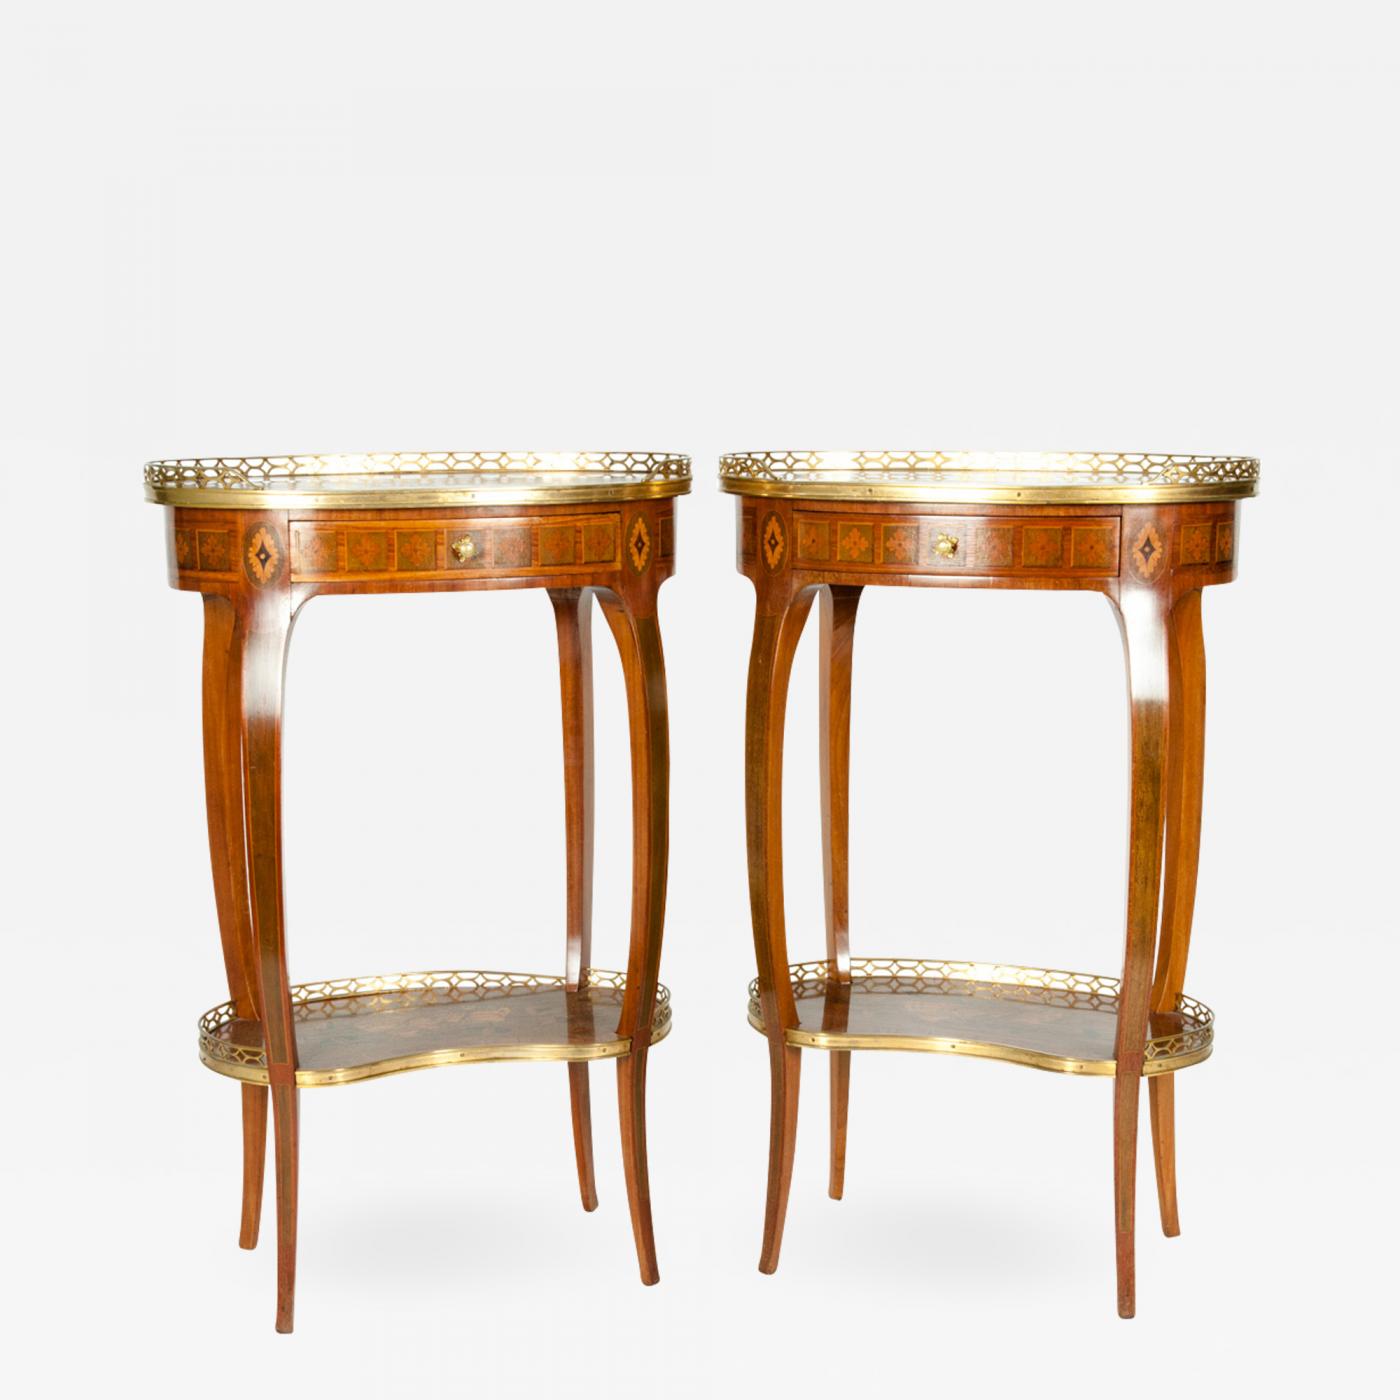 Pair Of Reproduction Louis Xv Style Accent Tables Auction